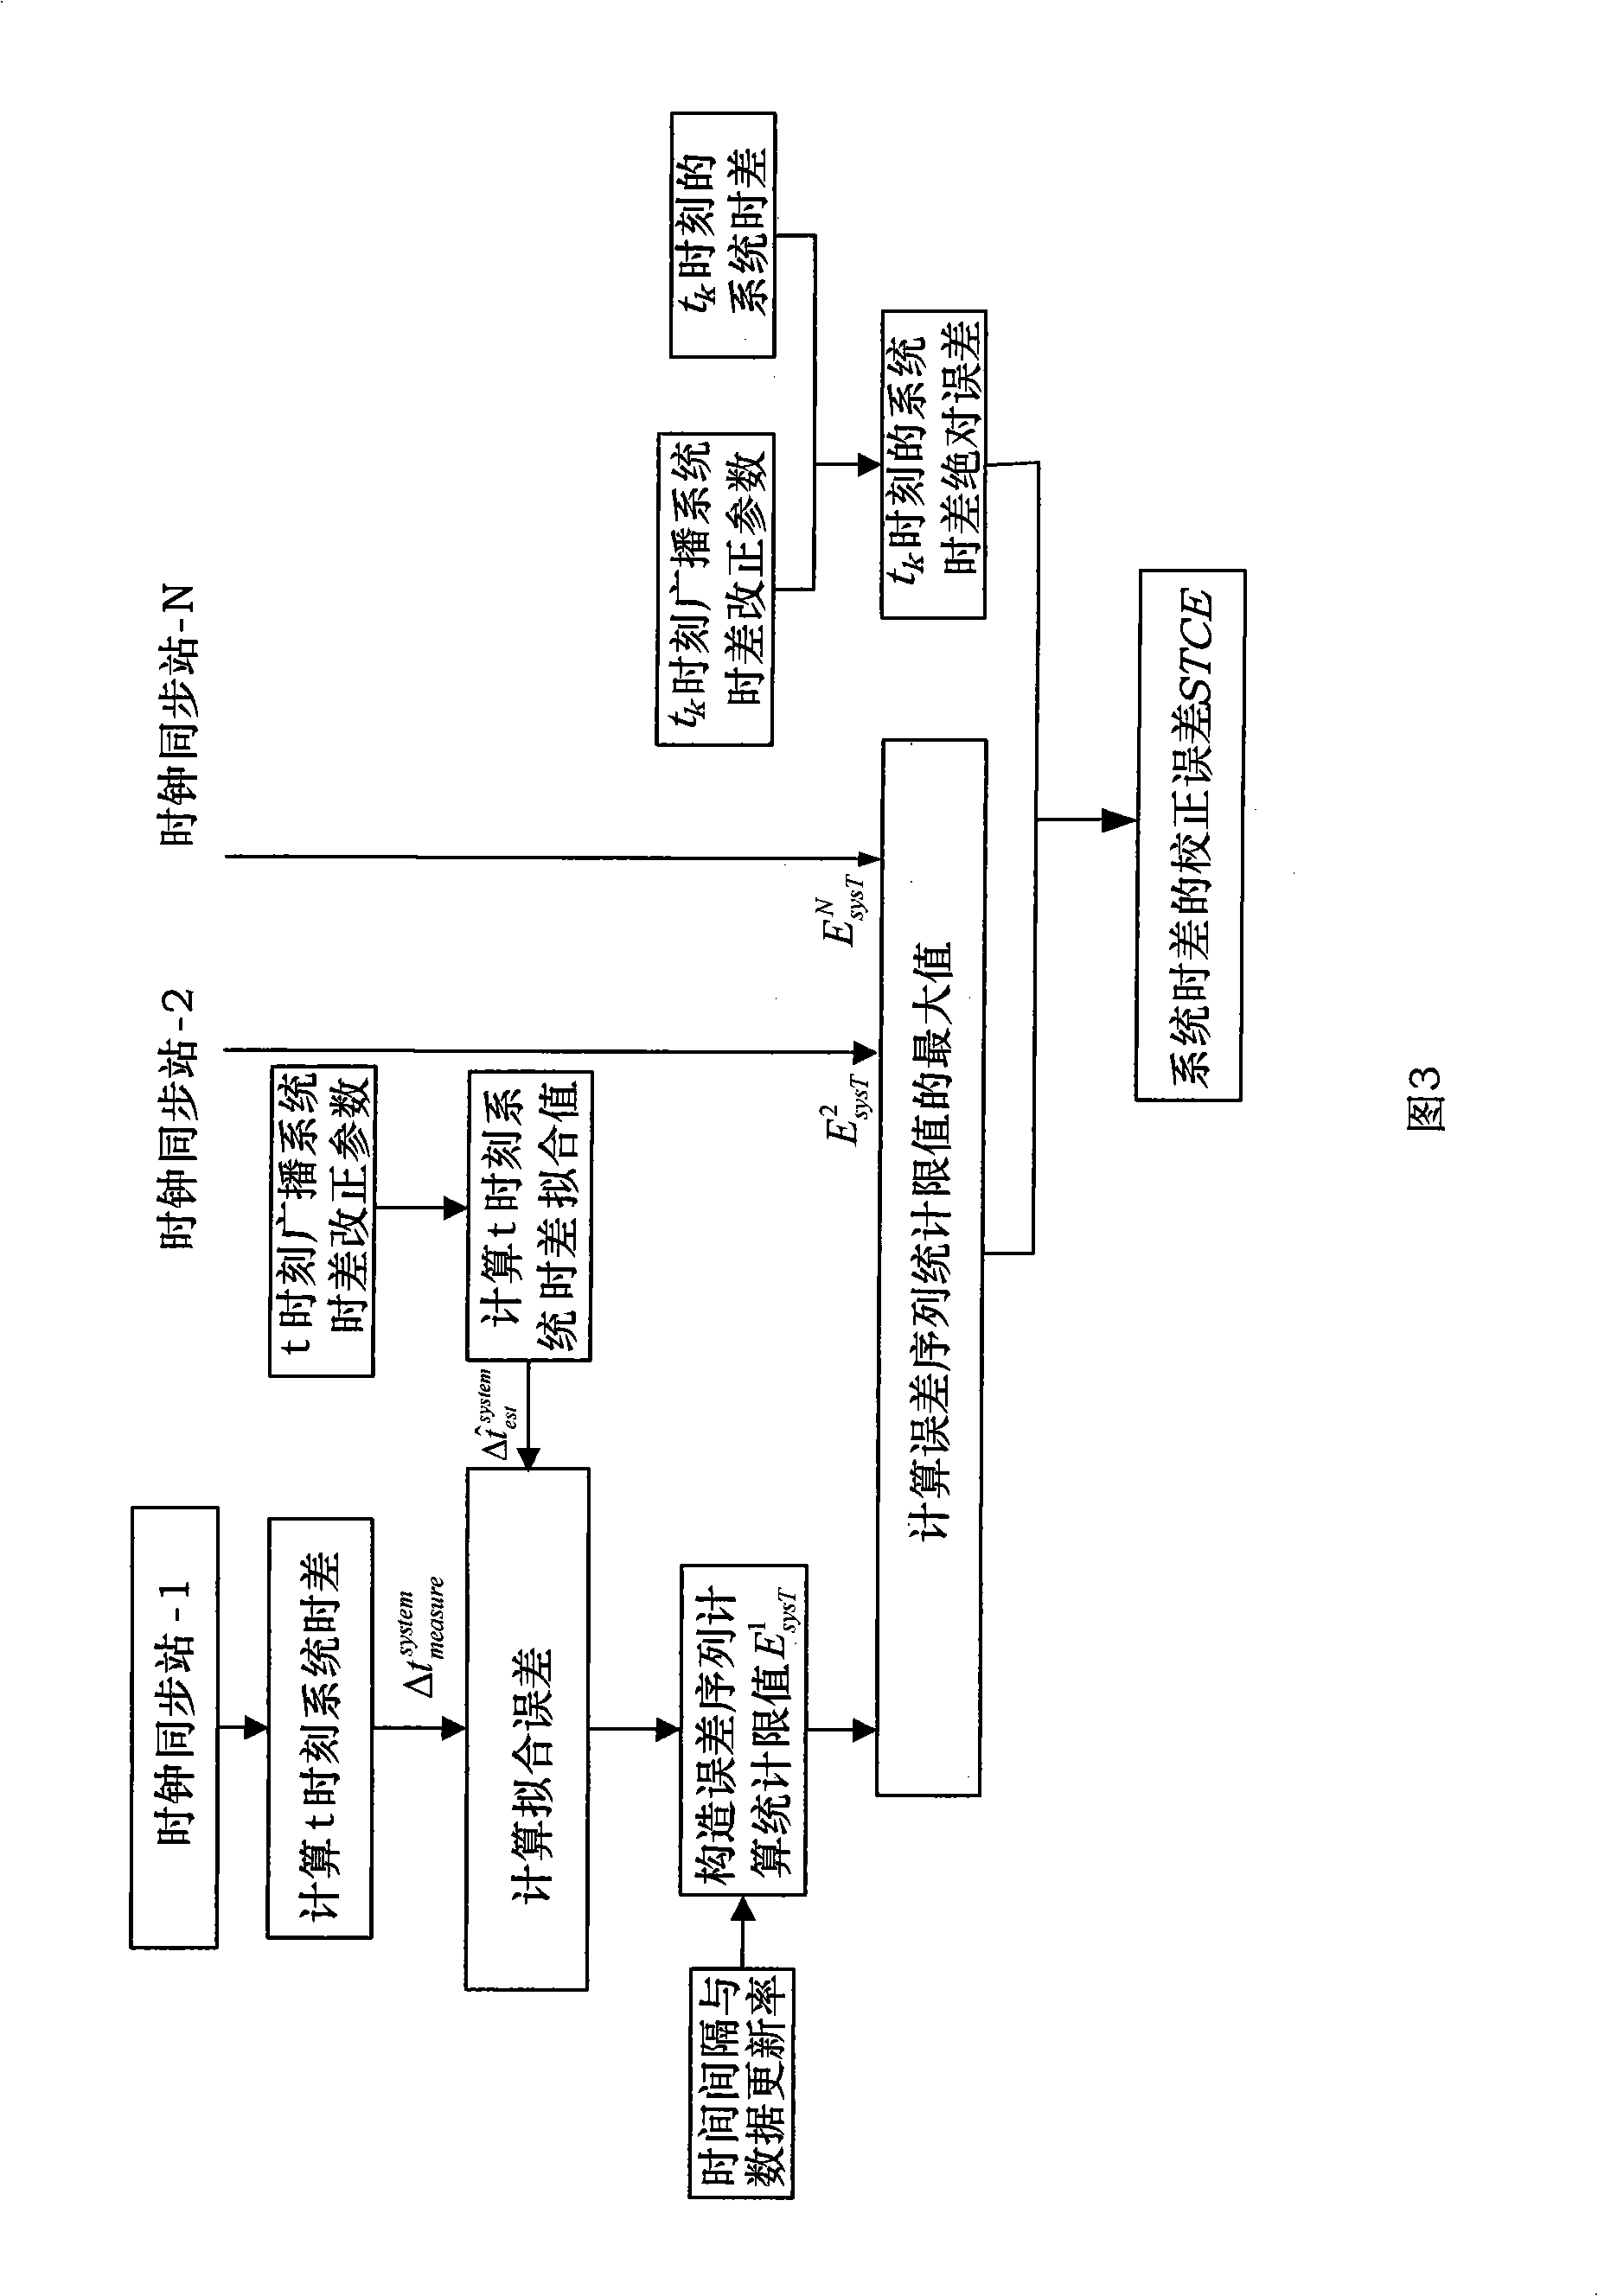 Method for correcting multiple constellation SBAS system time difference